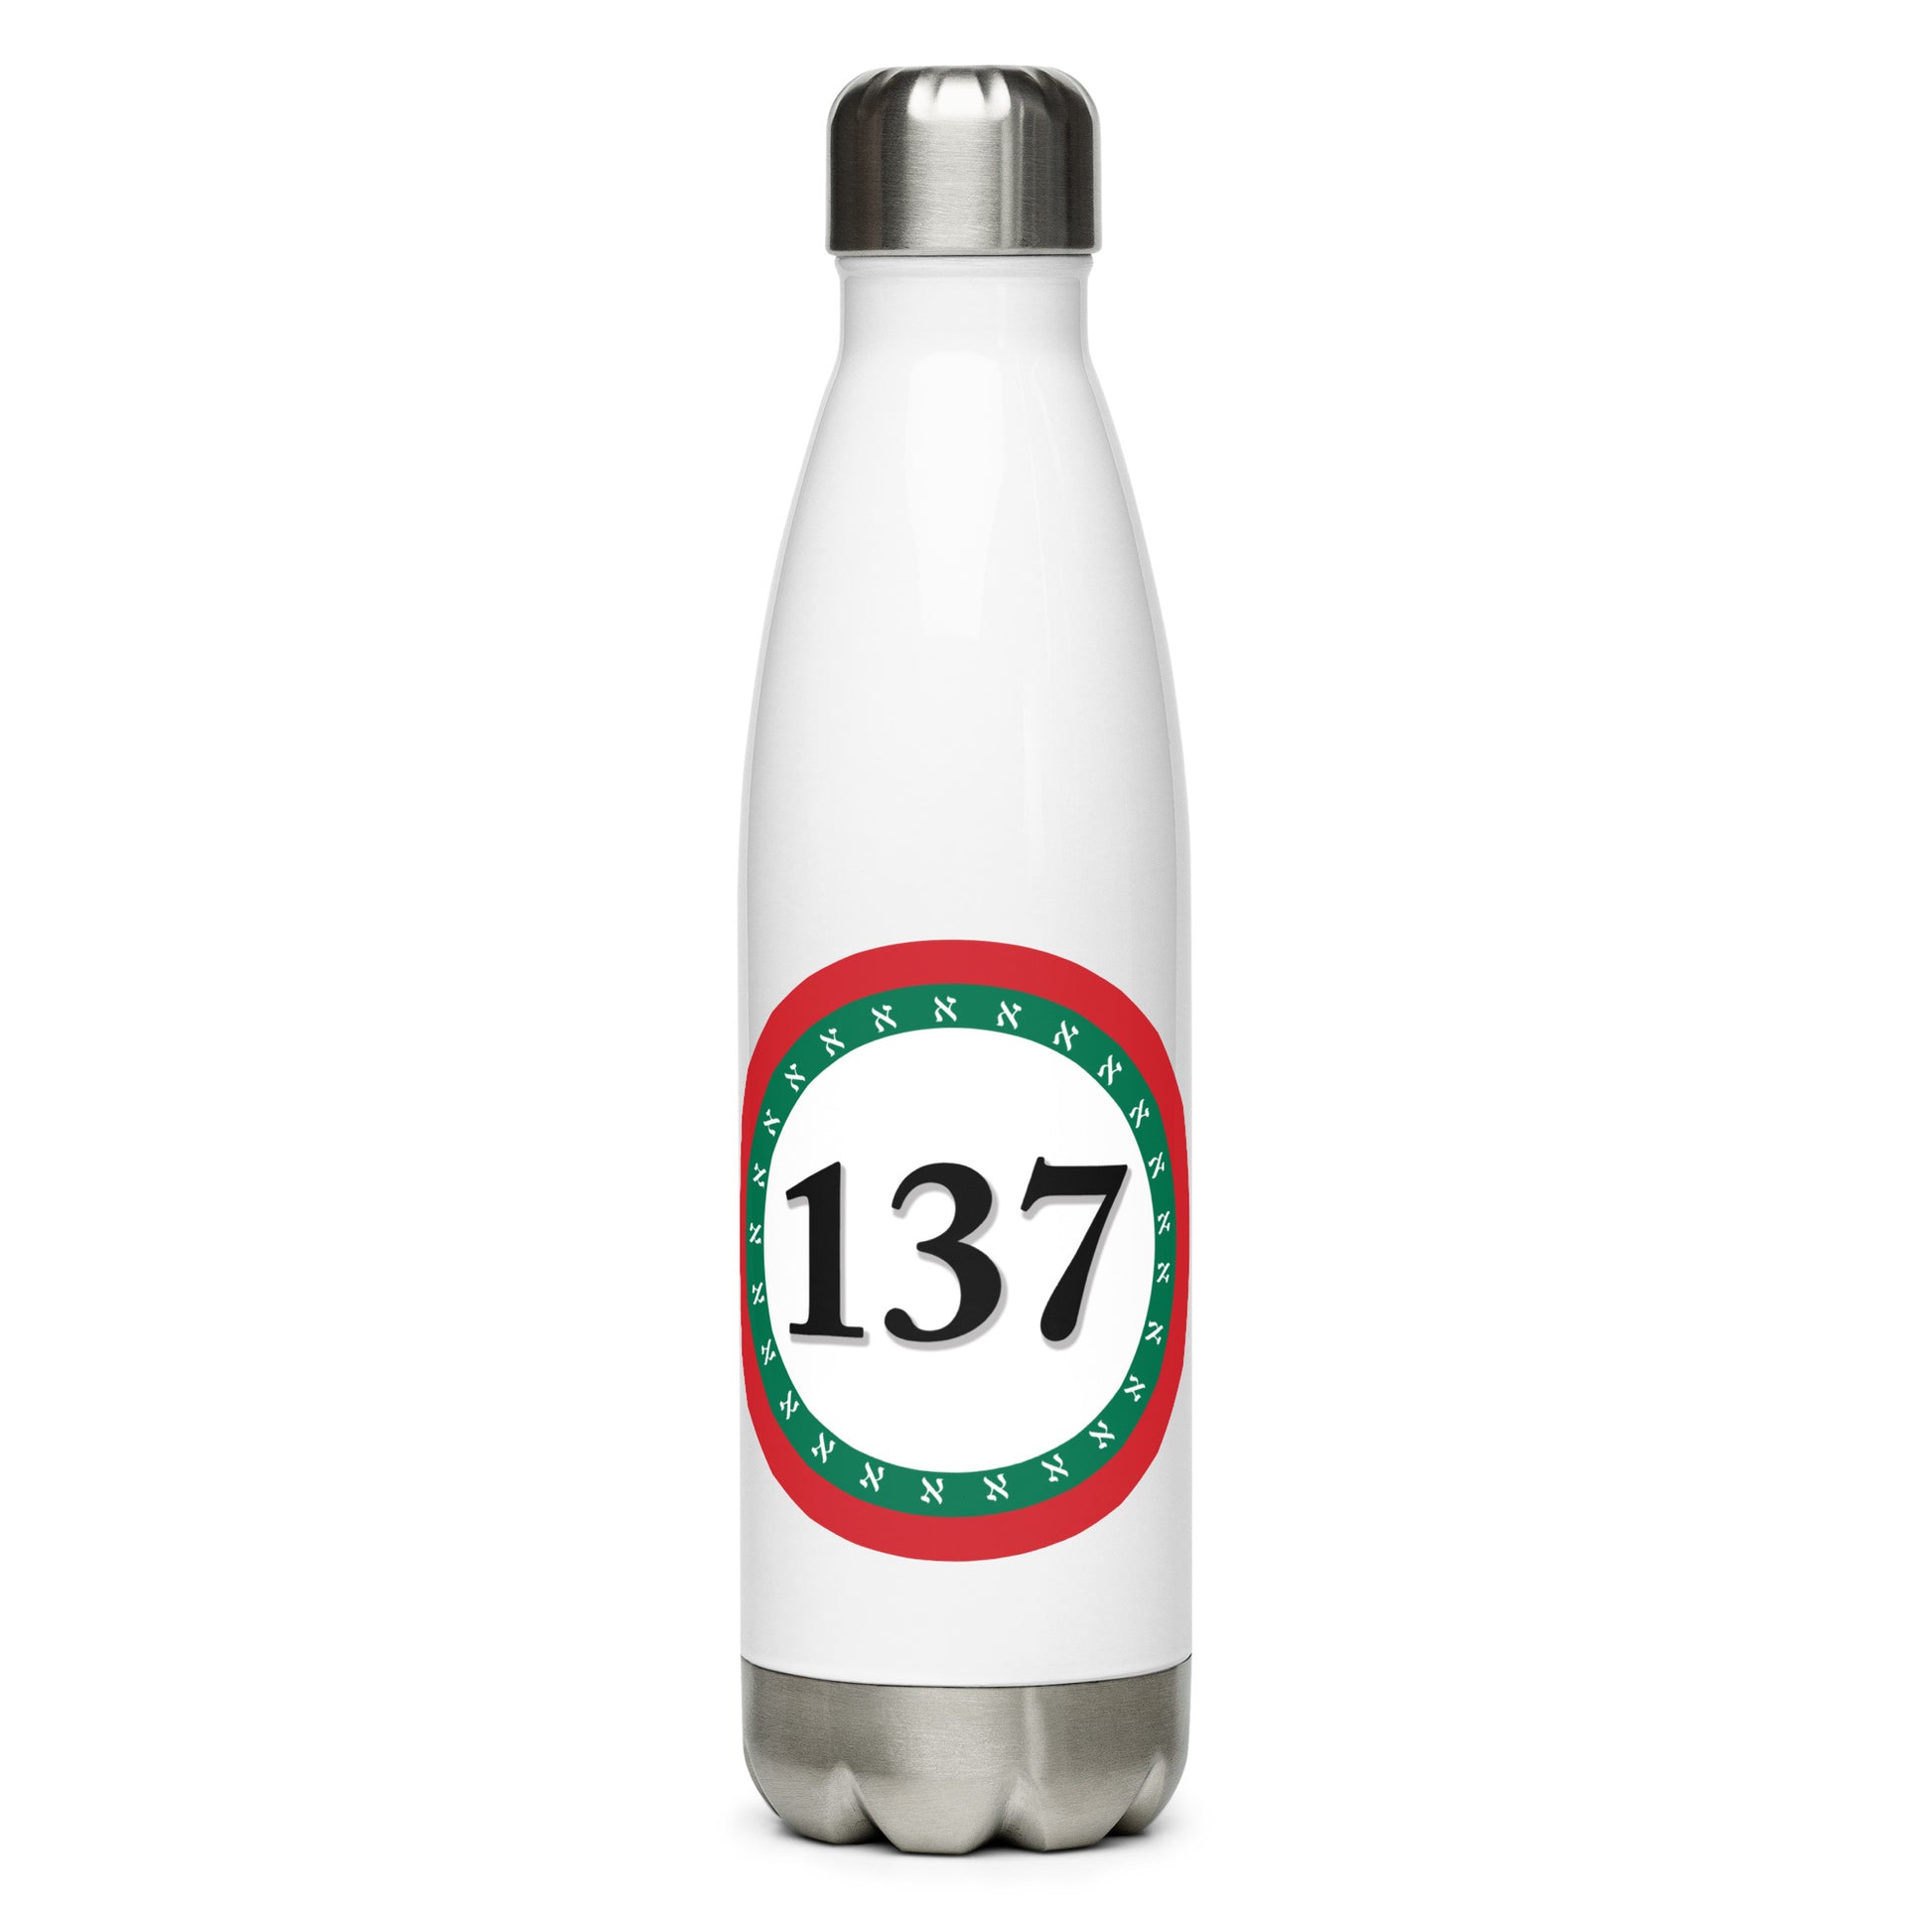  Stainless-Steel-Water-Bottle-17oz-Wht-137 Consciousness-2-137online.com